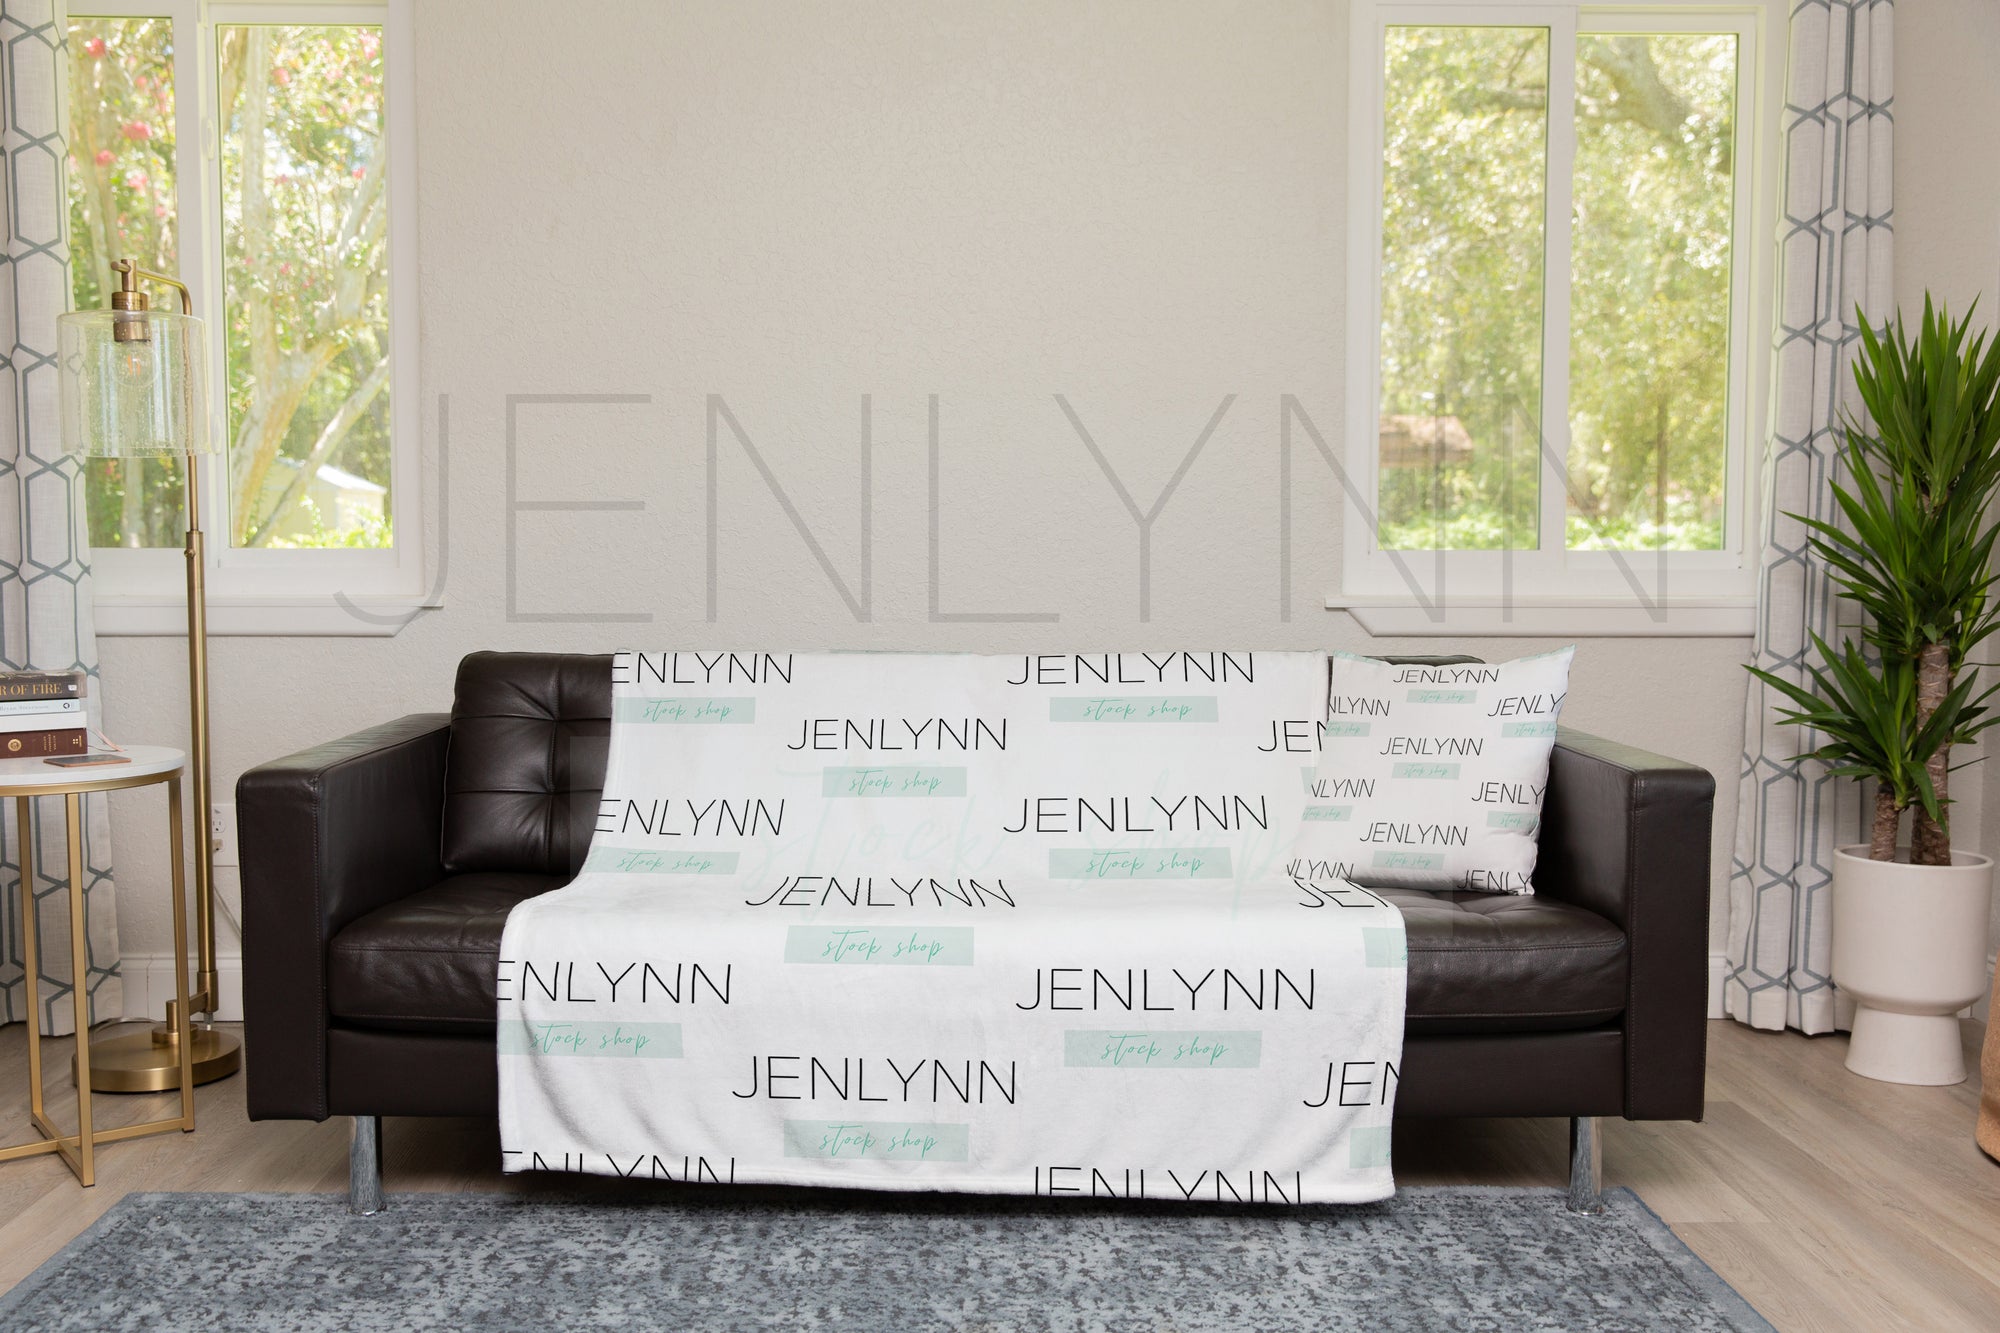 Minky Blanket + Pillow on Couch Mockup #TH01